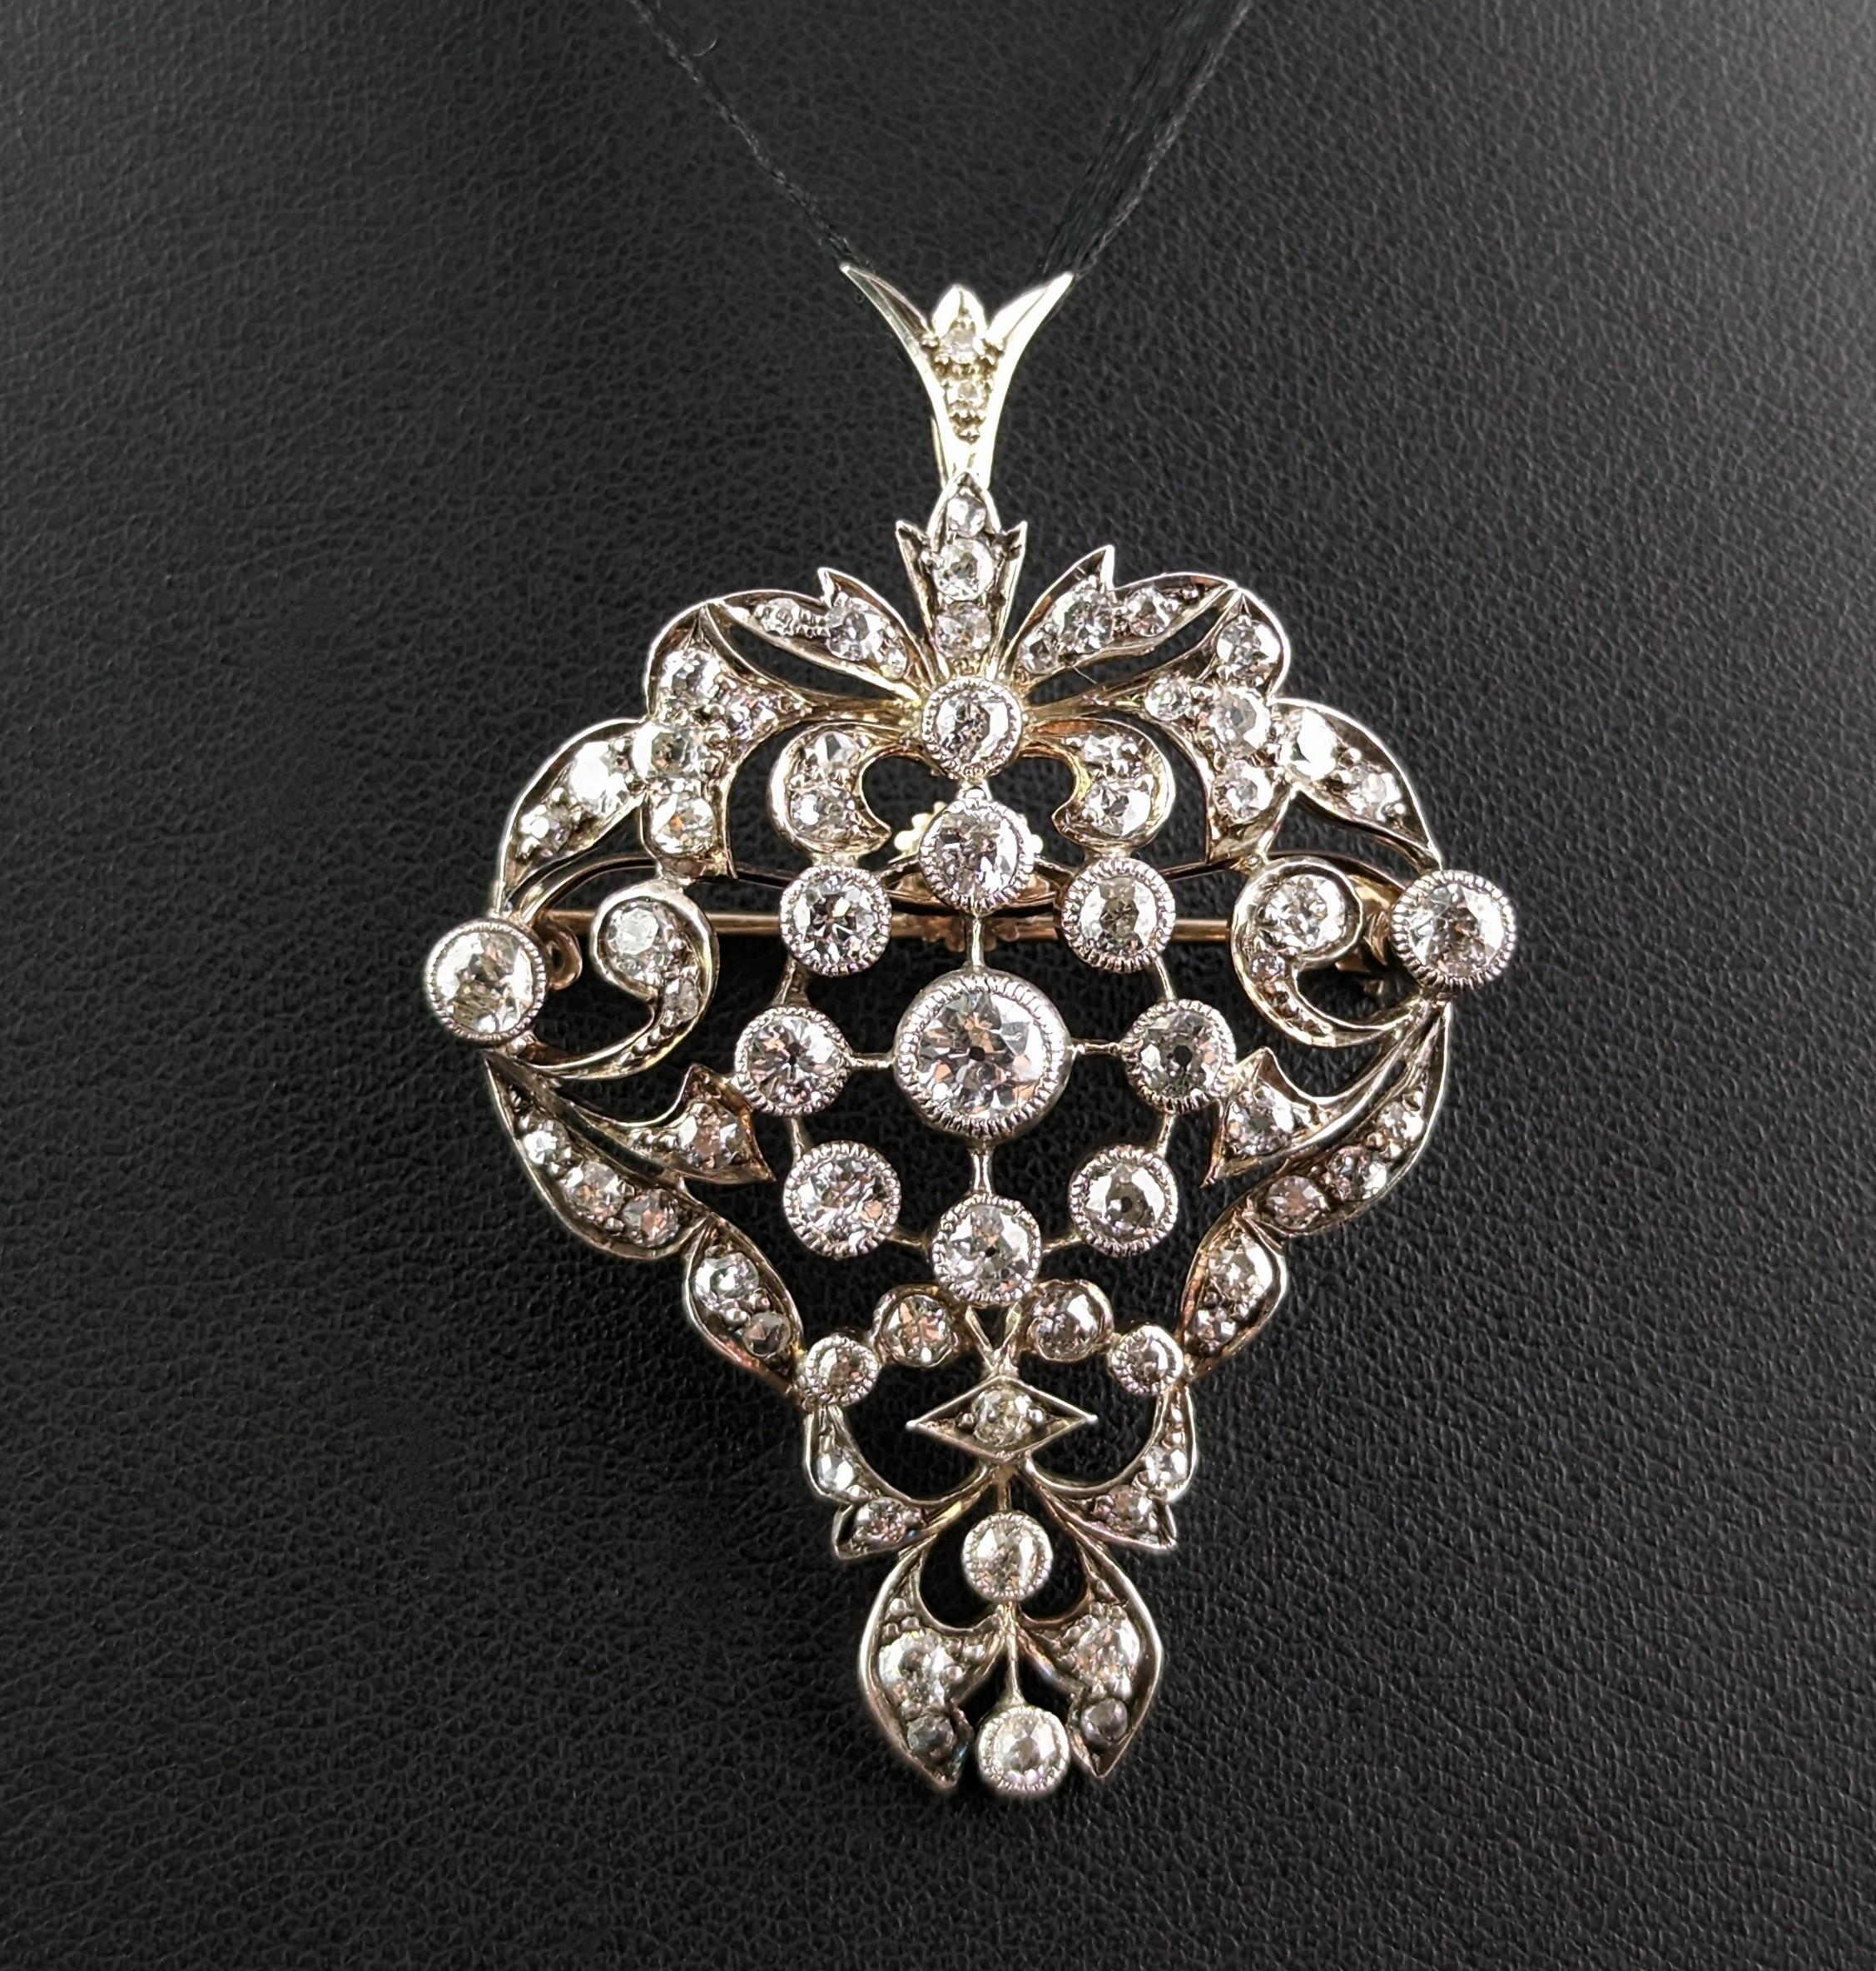 Antique Victorian Diamond Pendant Brooch, Bunch of Grapes, 9k Gold and Silver For Sale 3